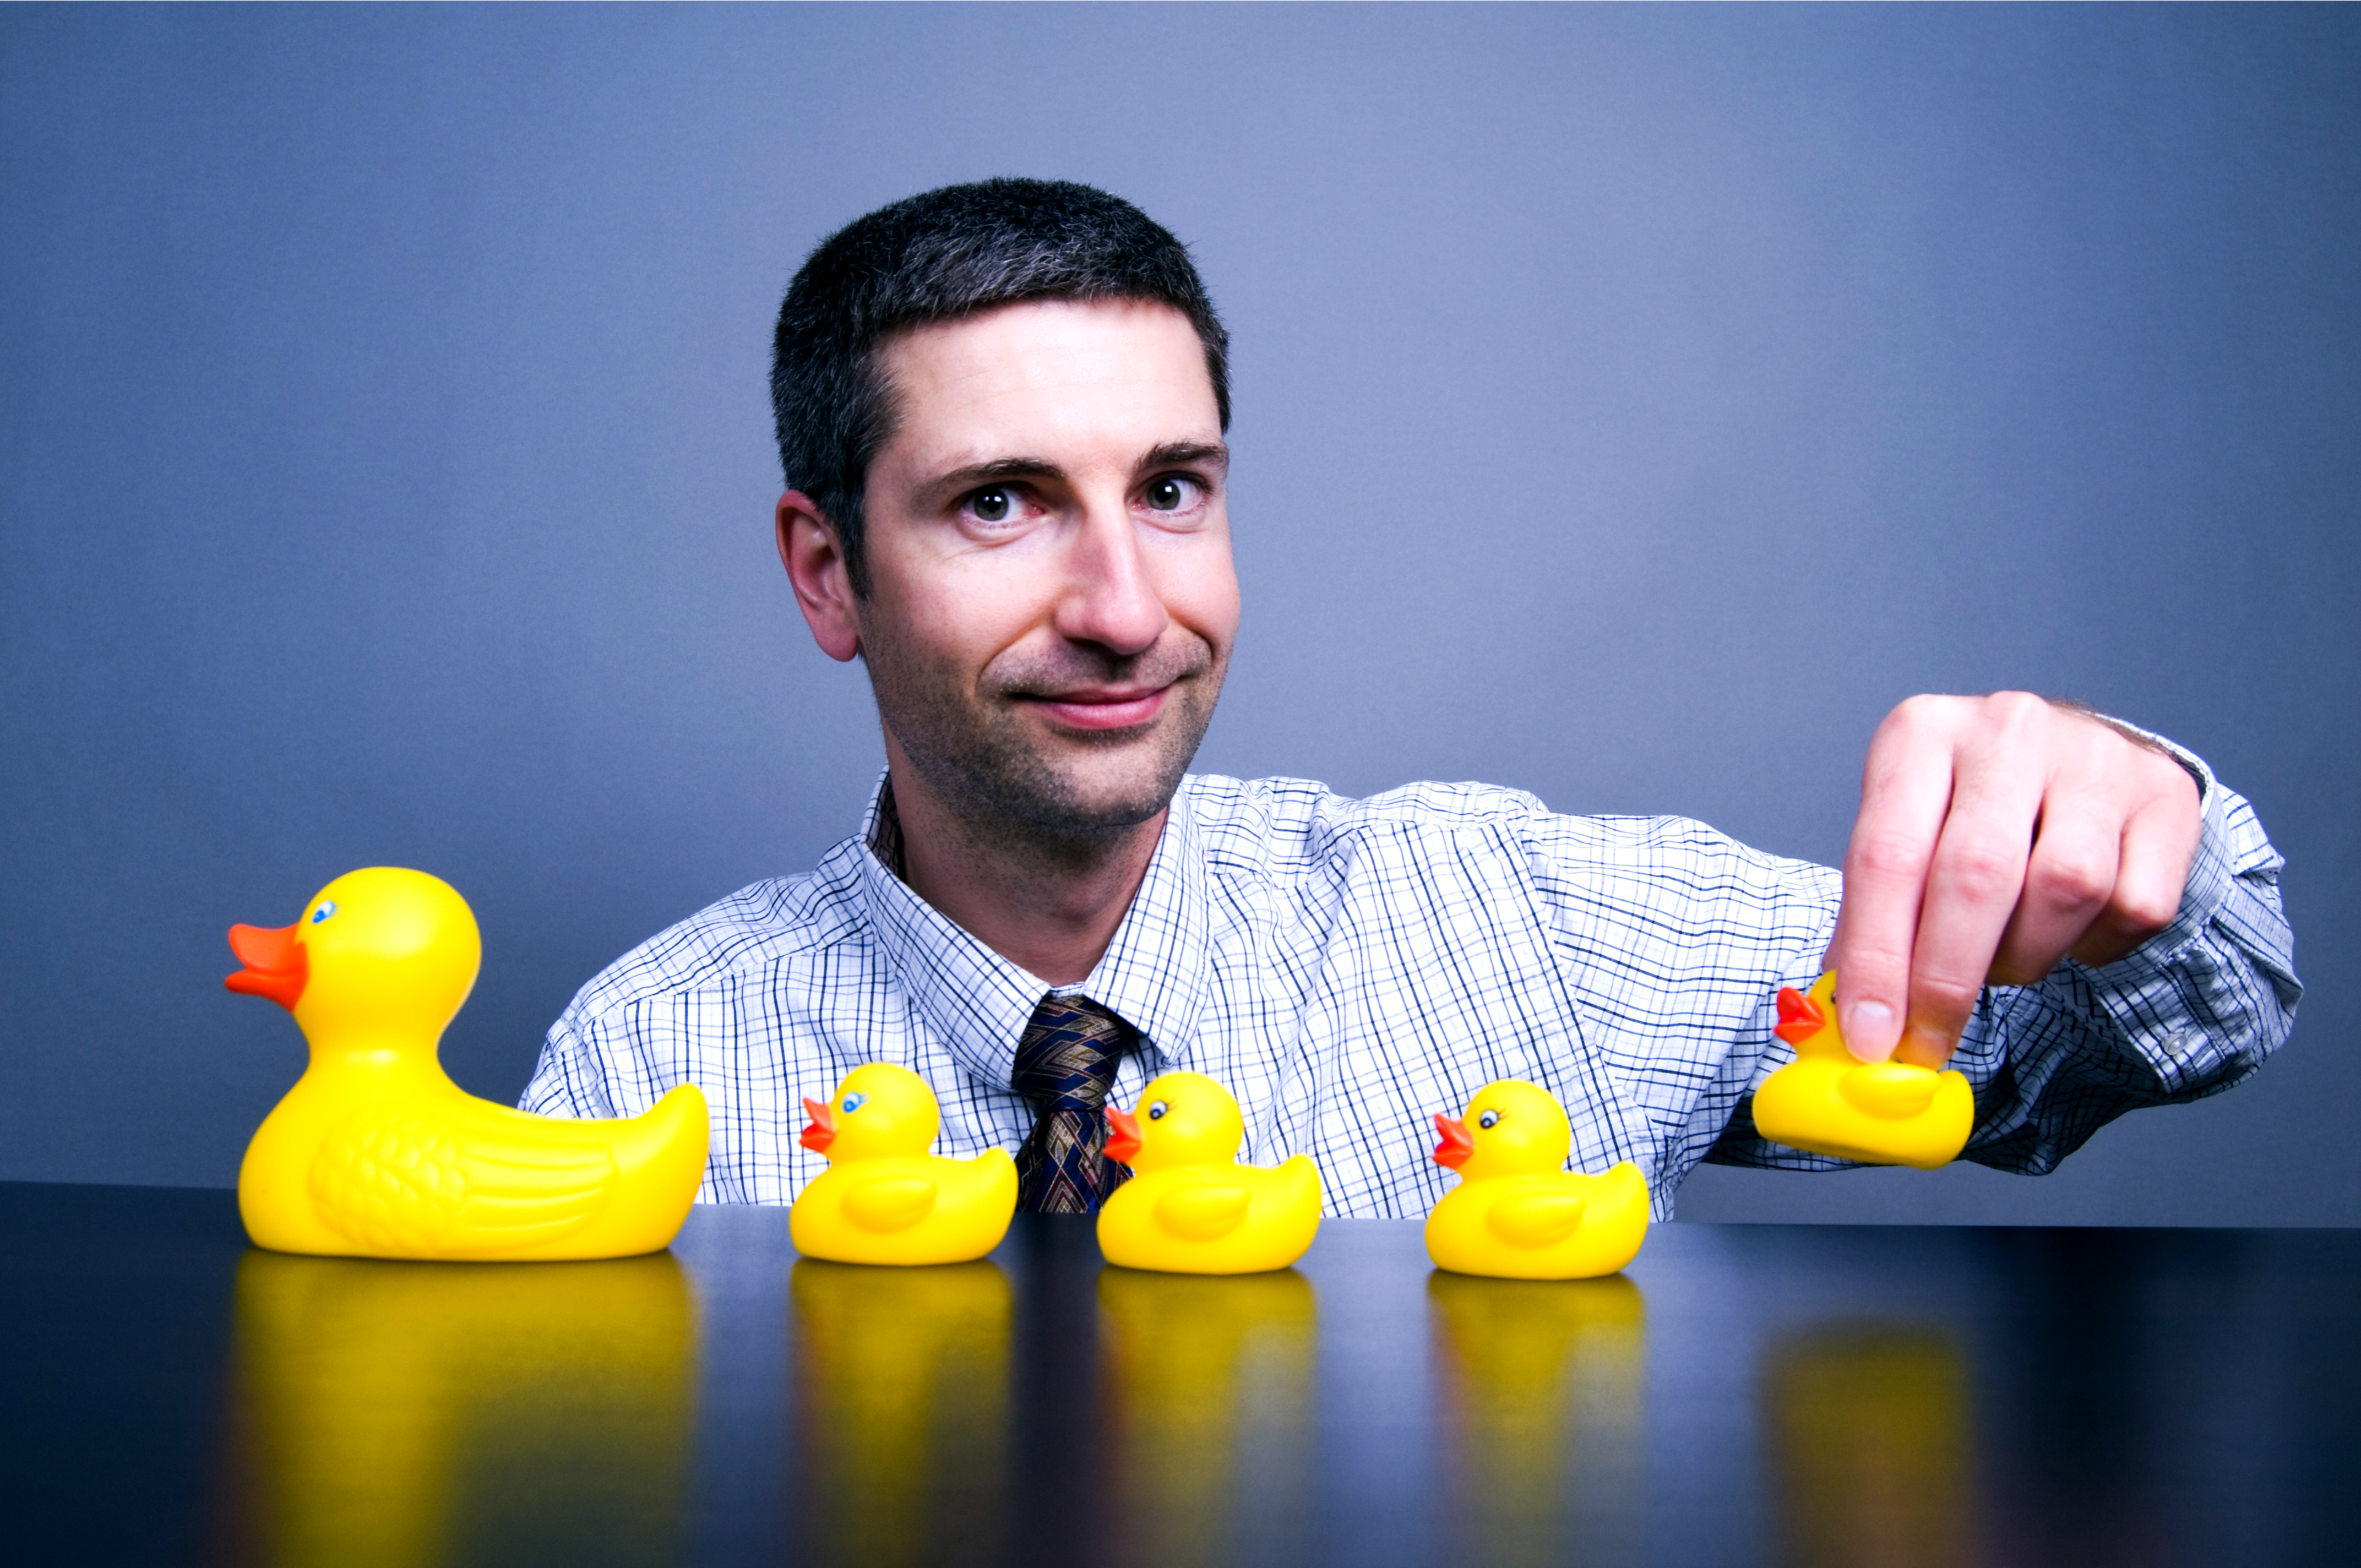 Man pondering life in the sales lane with yellow rubber duckies 